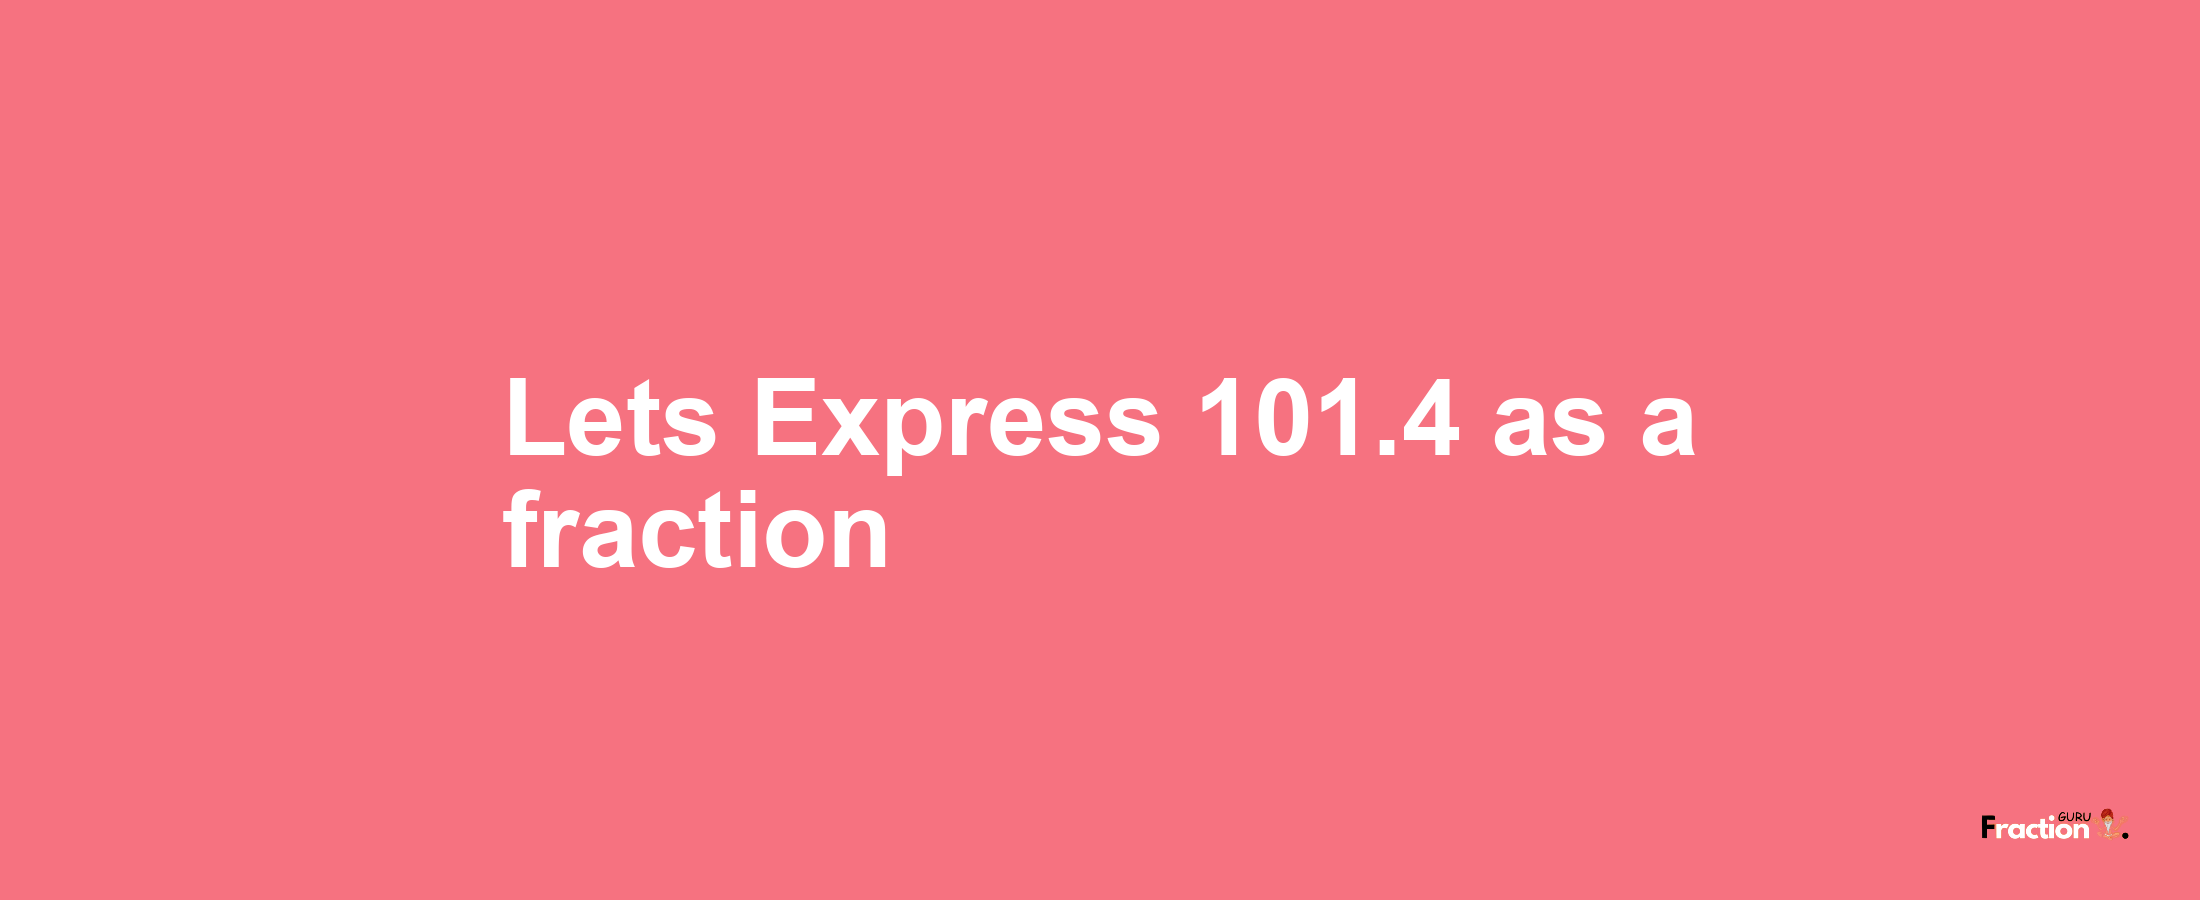 Lets Express 101.4 as afraction